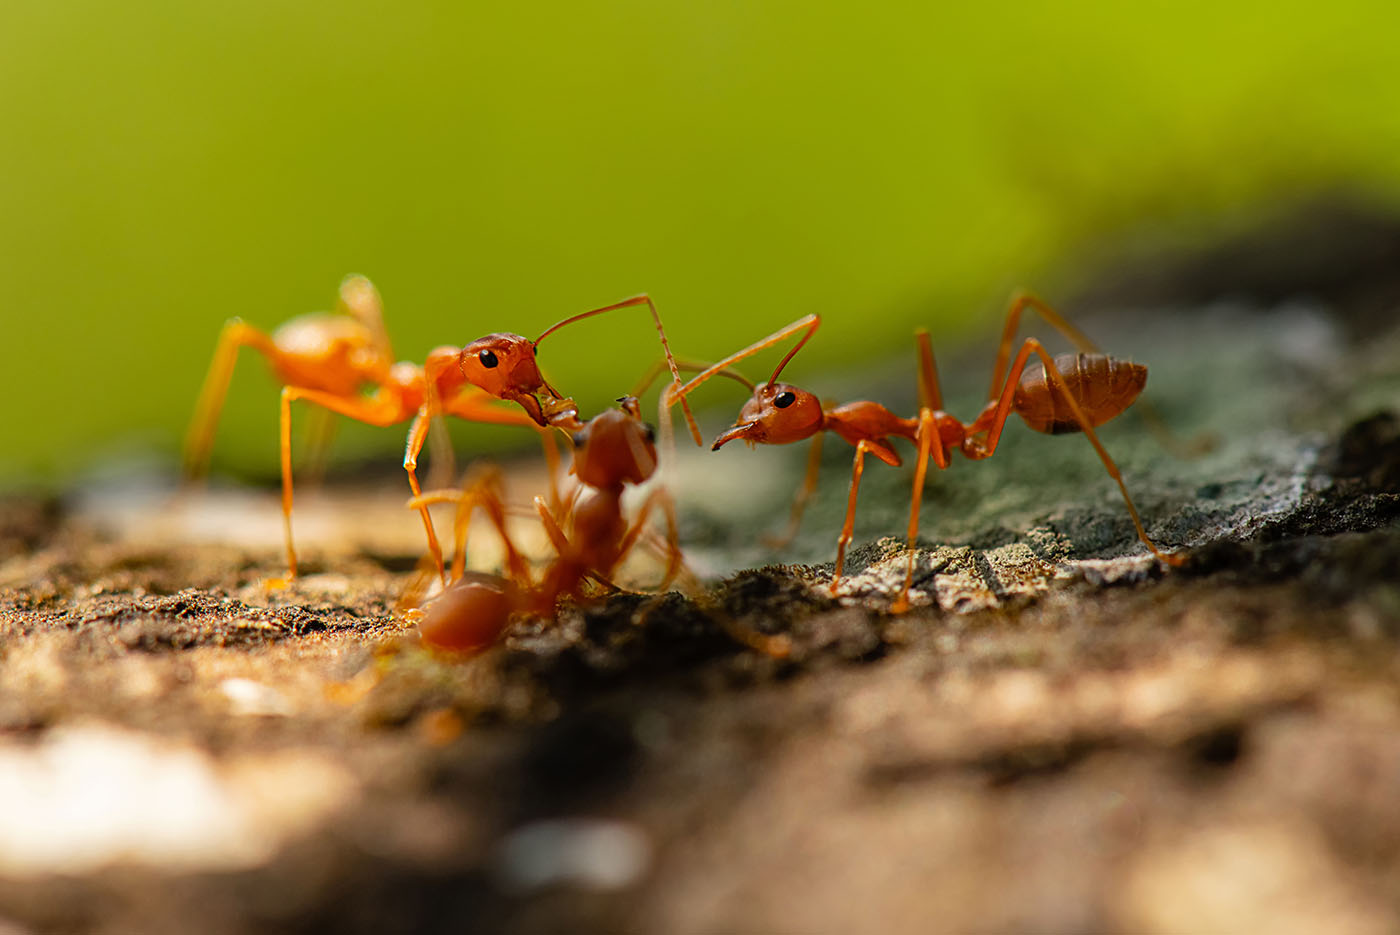 A group of ants on a log - experience the best ant control in Hillsboro, TX with GGA Pest Management.